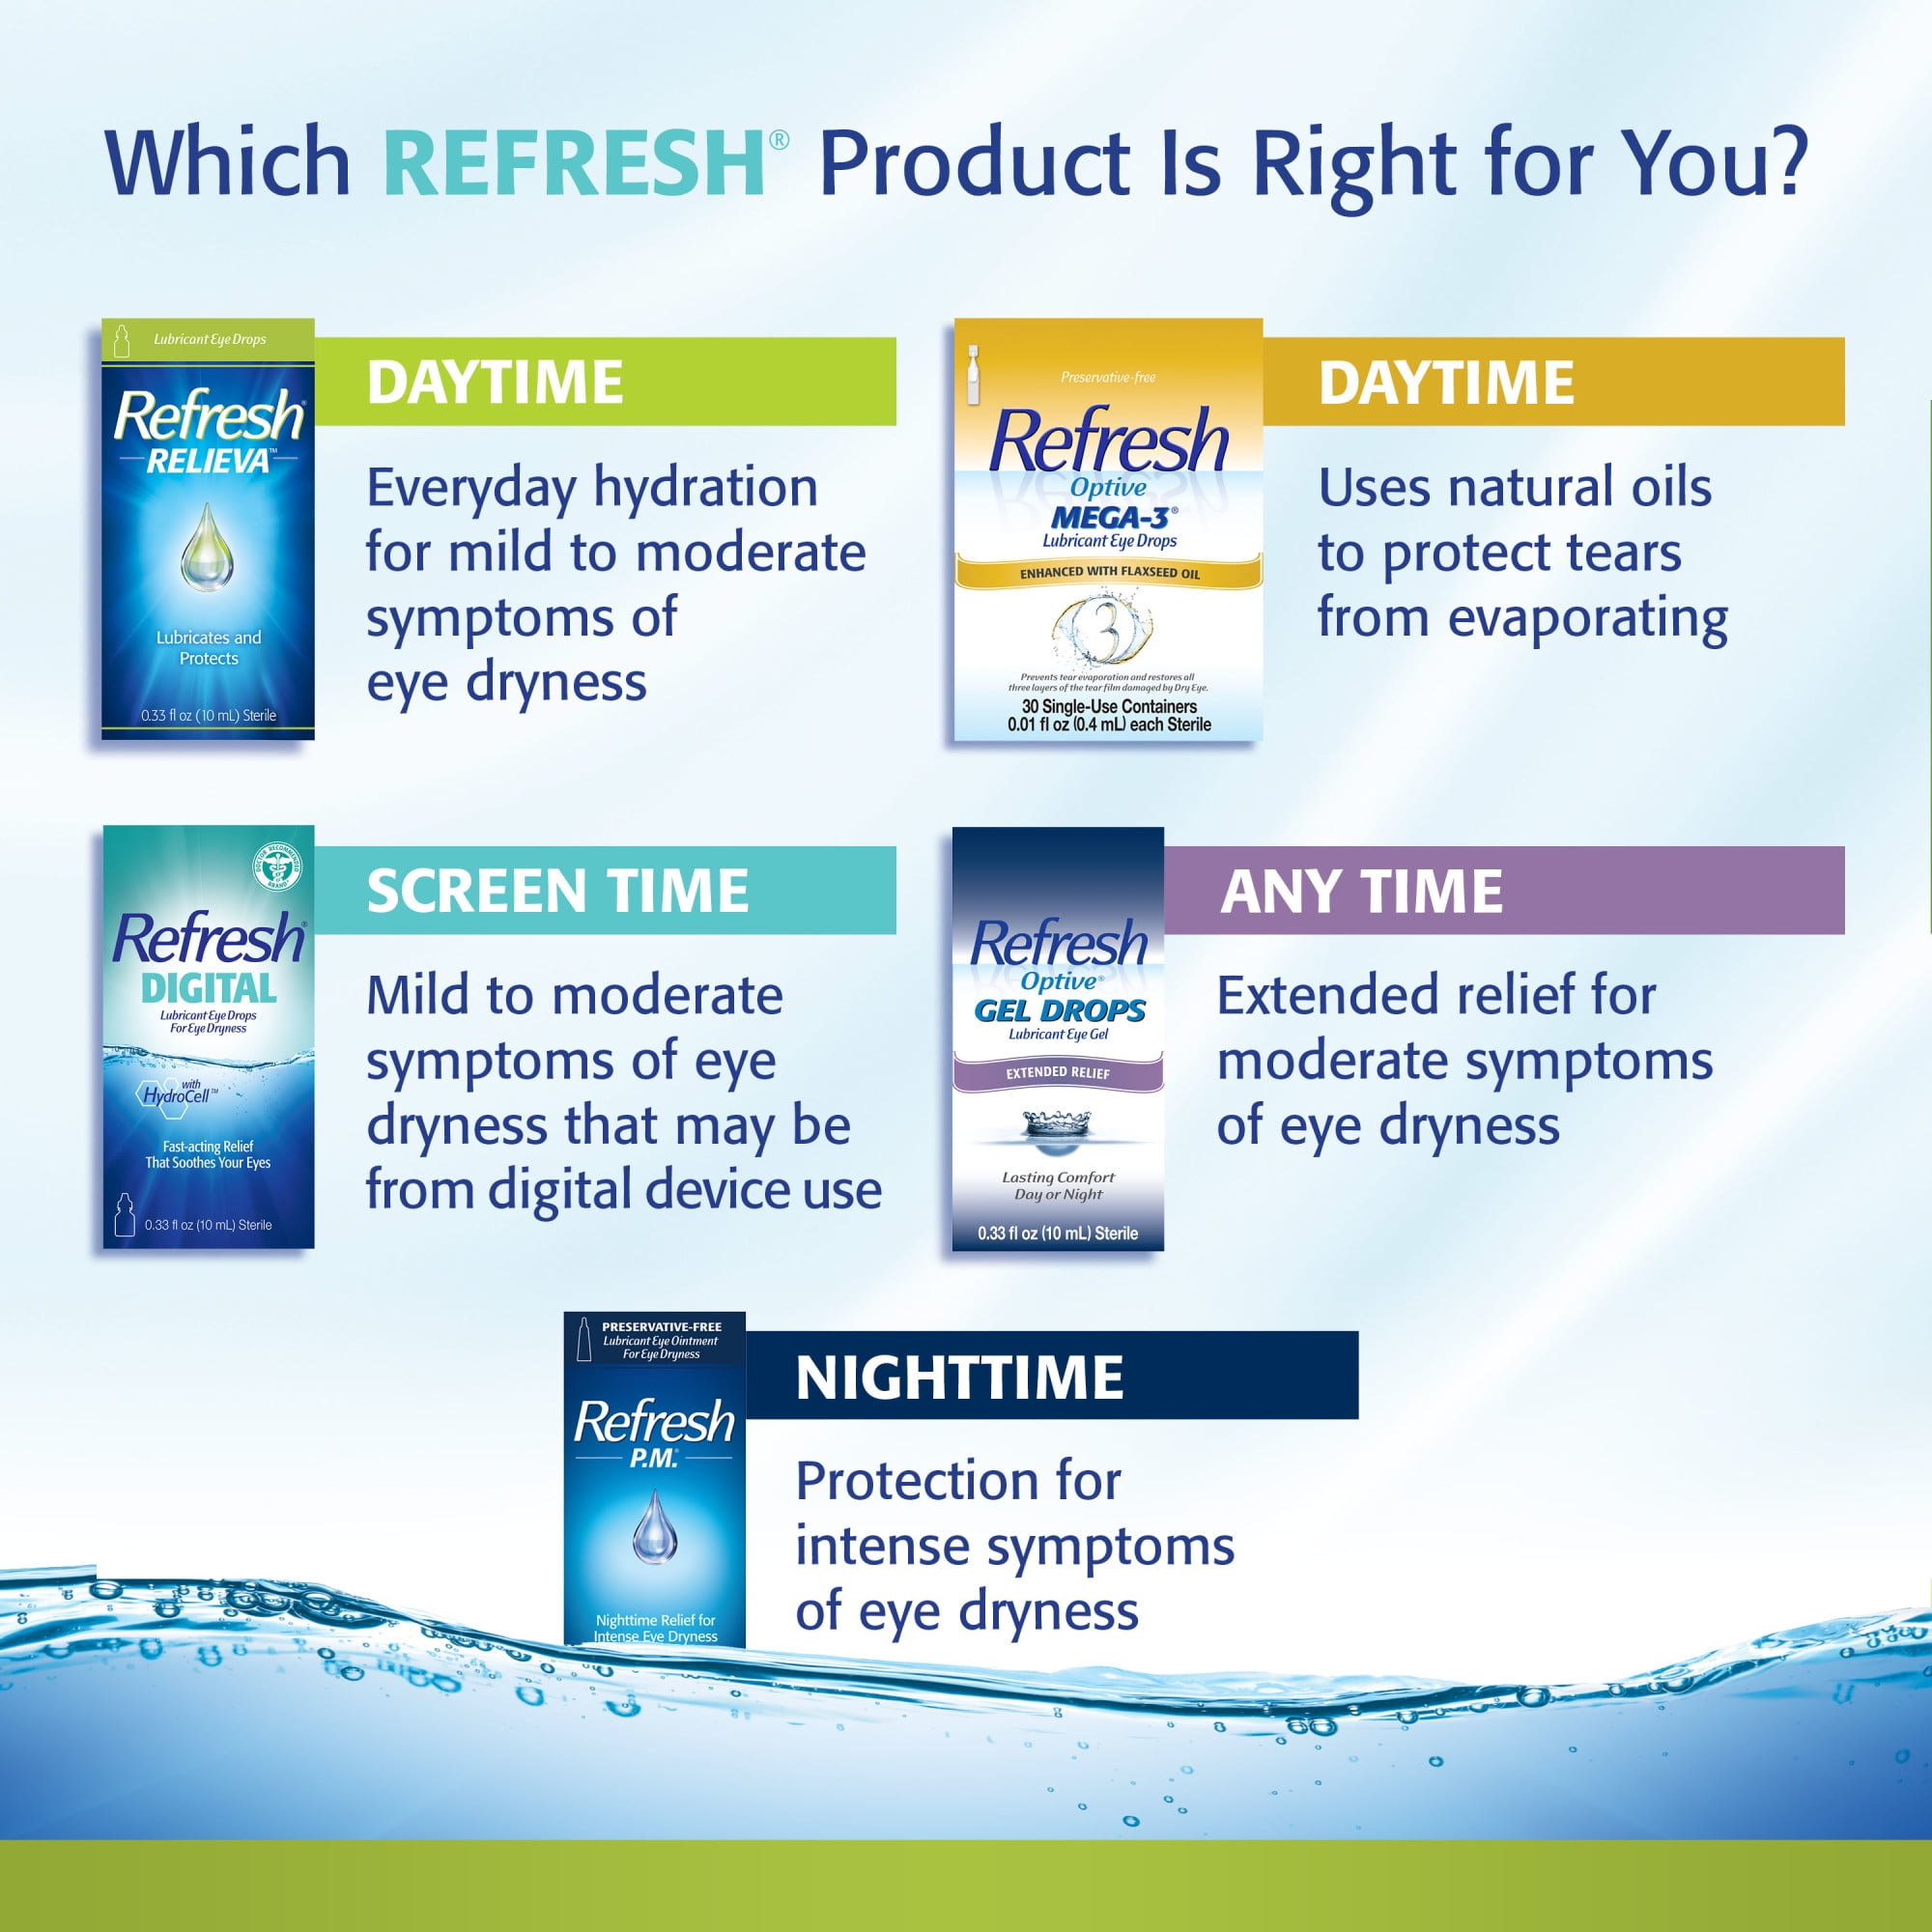 Refresh Relieva Relieves and Protects